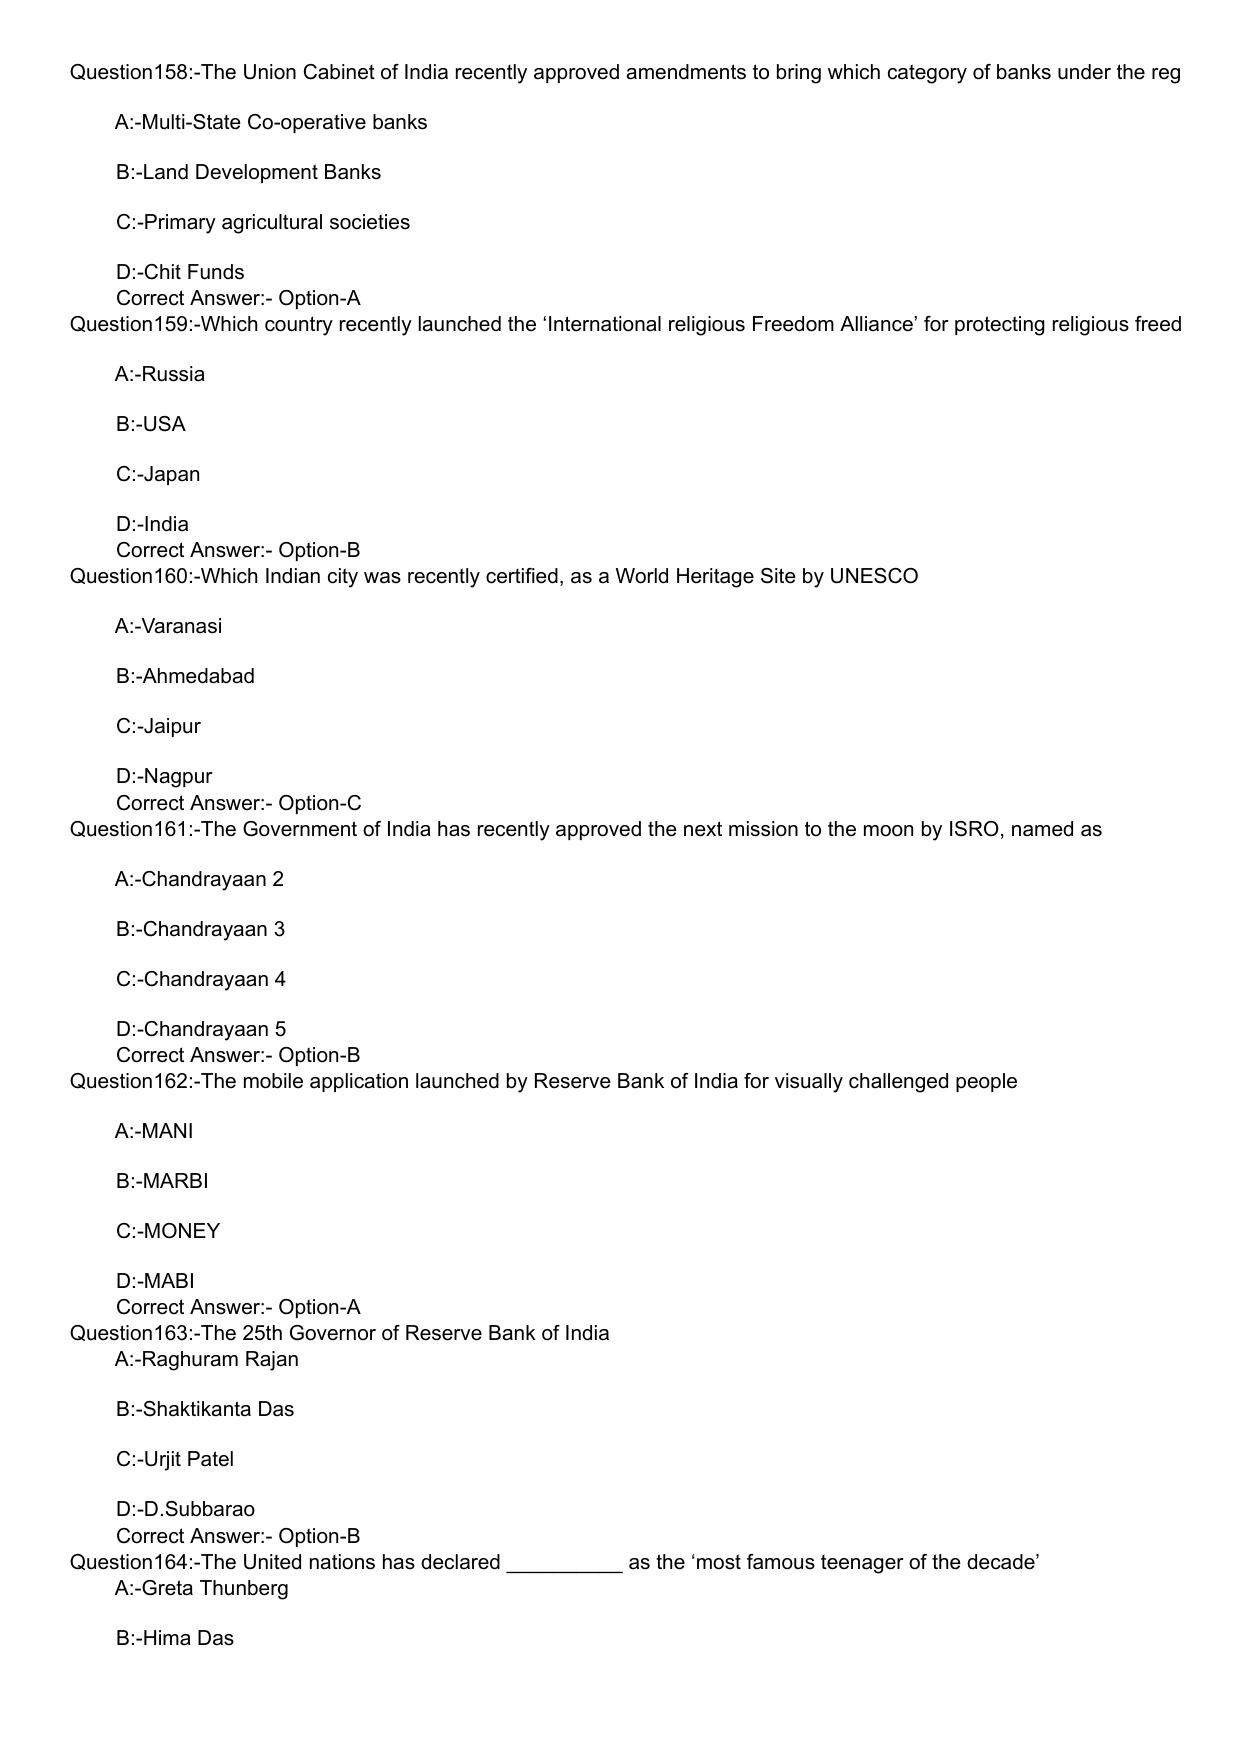 KLEE 5 Year LLB Exam 2020 Question Paper - Page 28